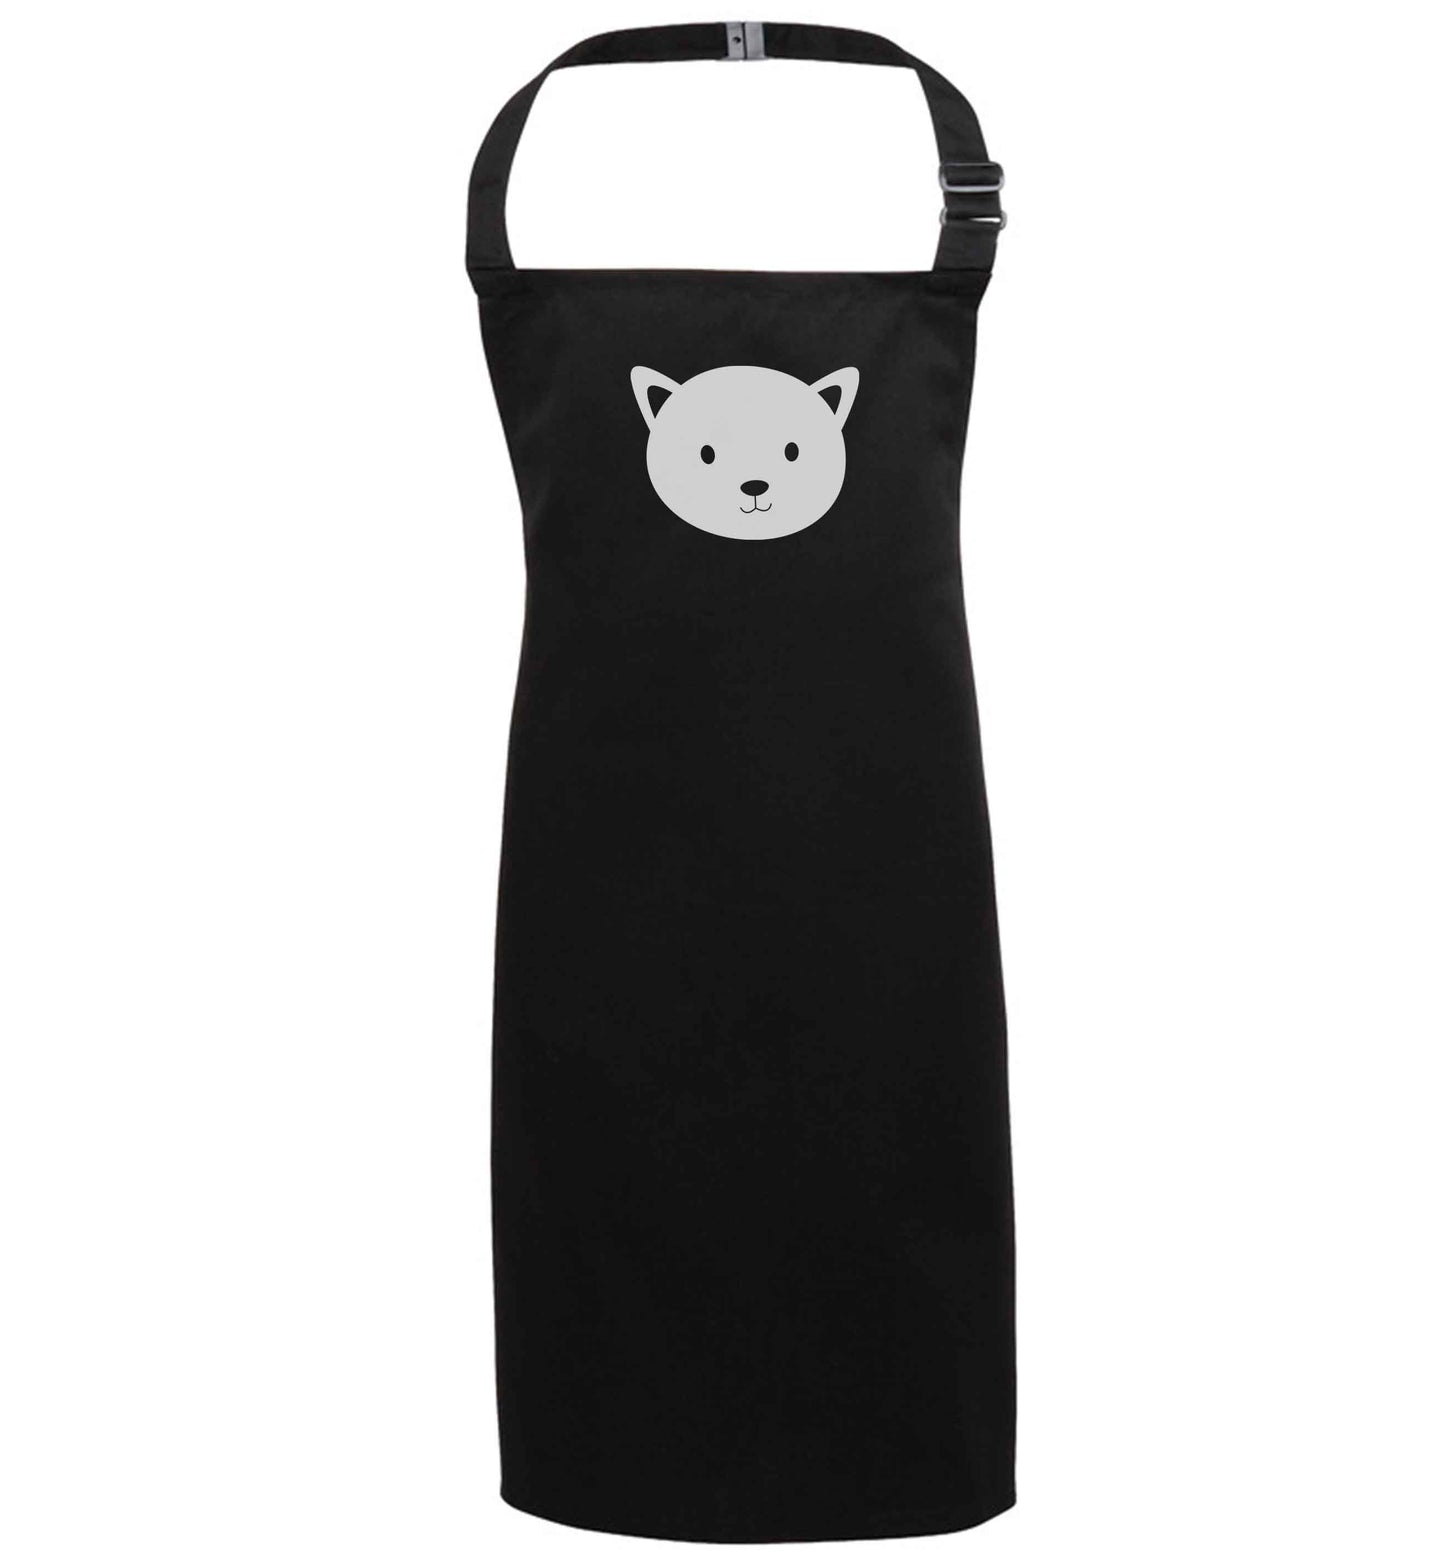 Cat face only Kit black apron 7-10 years